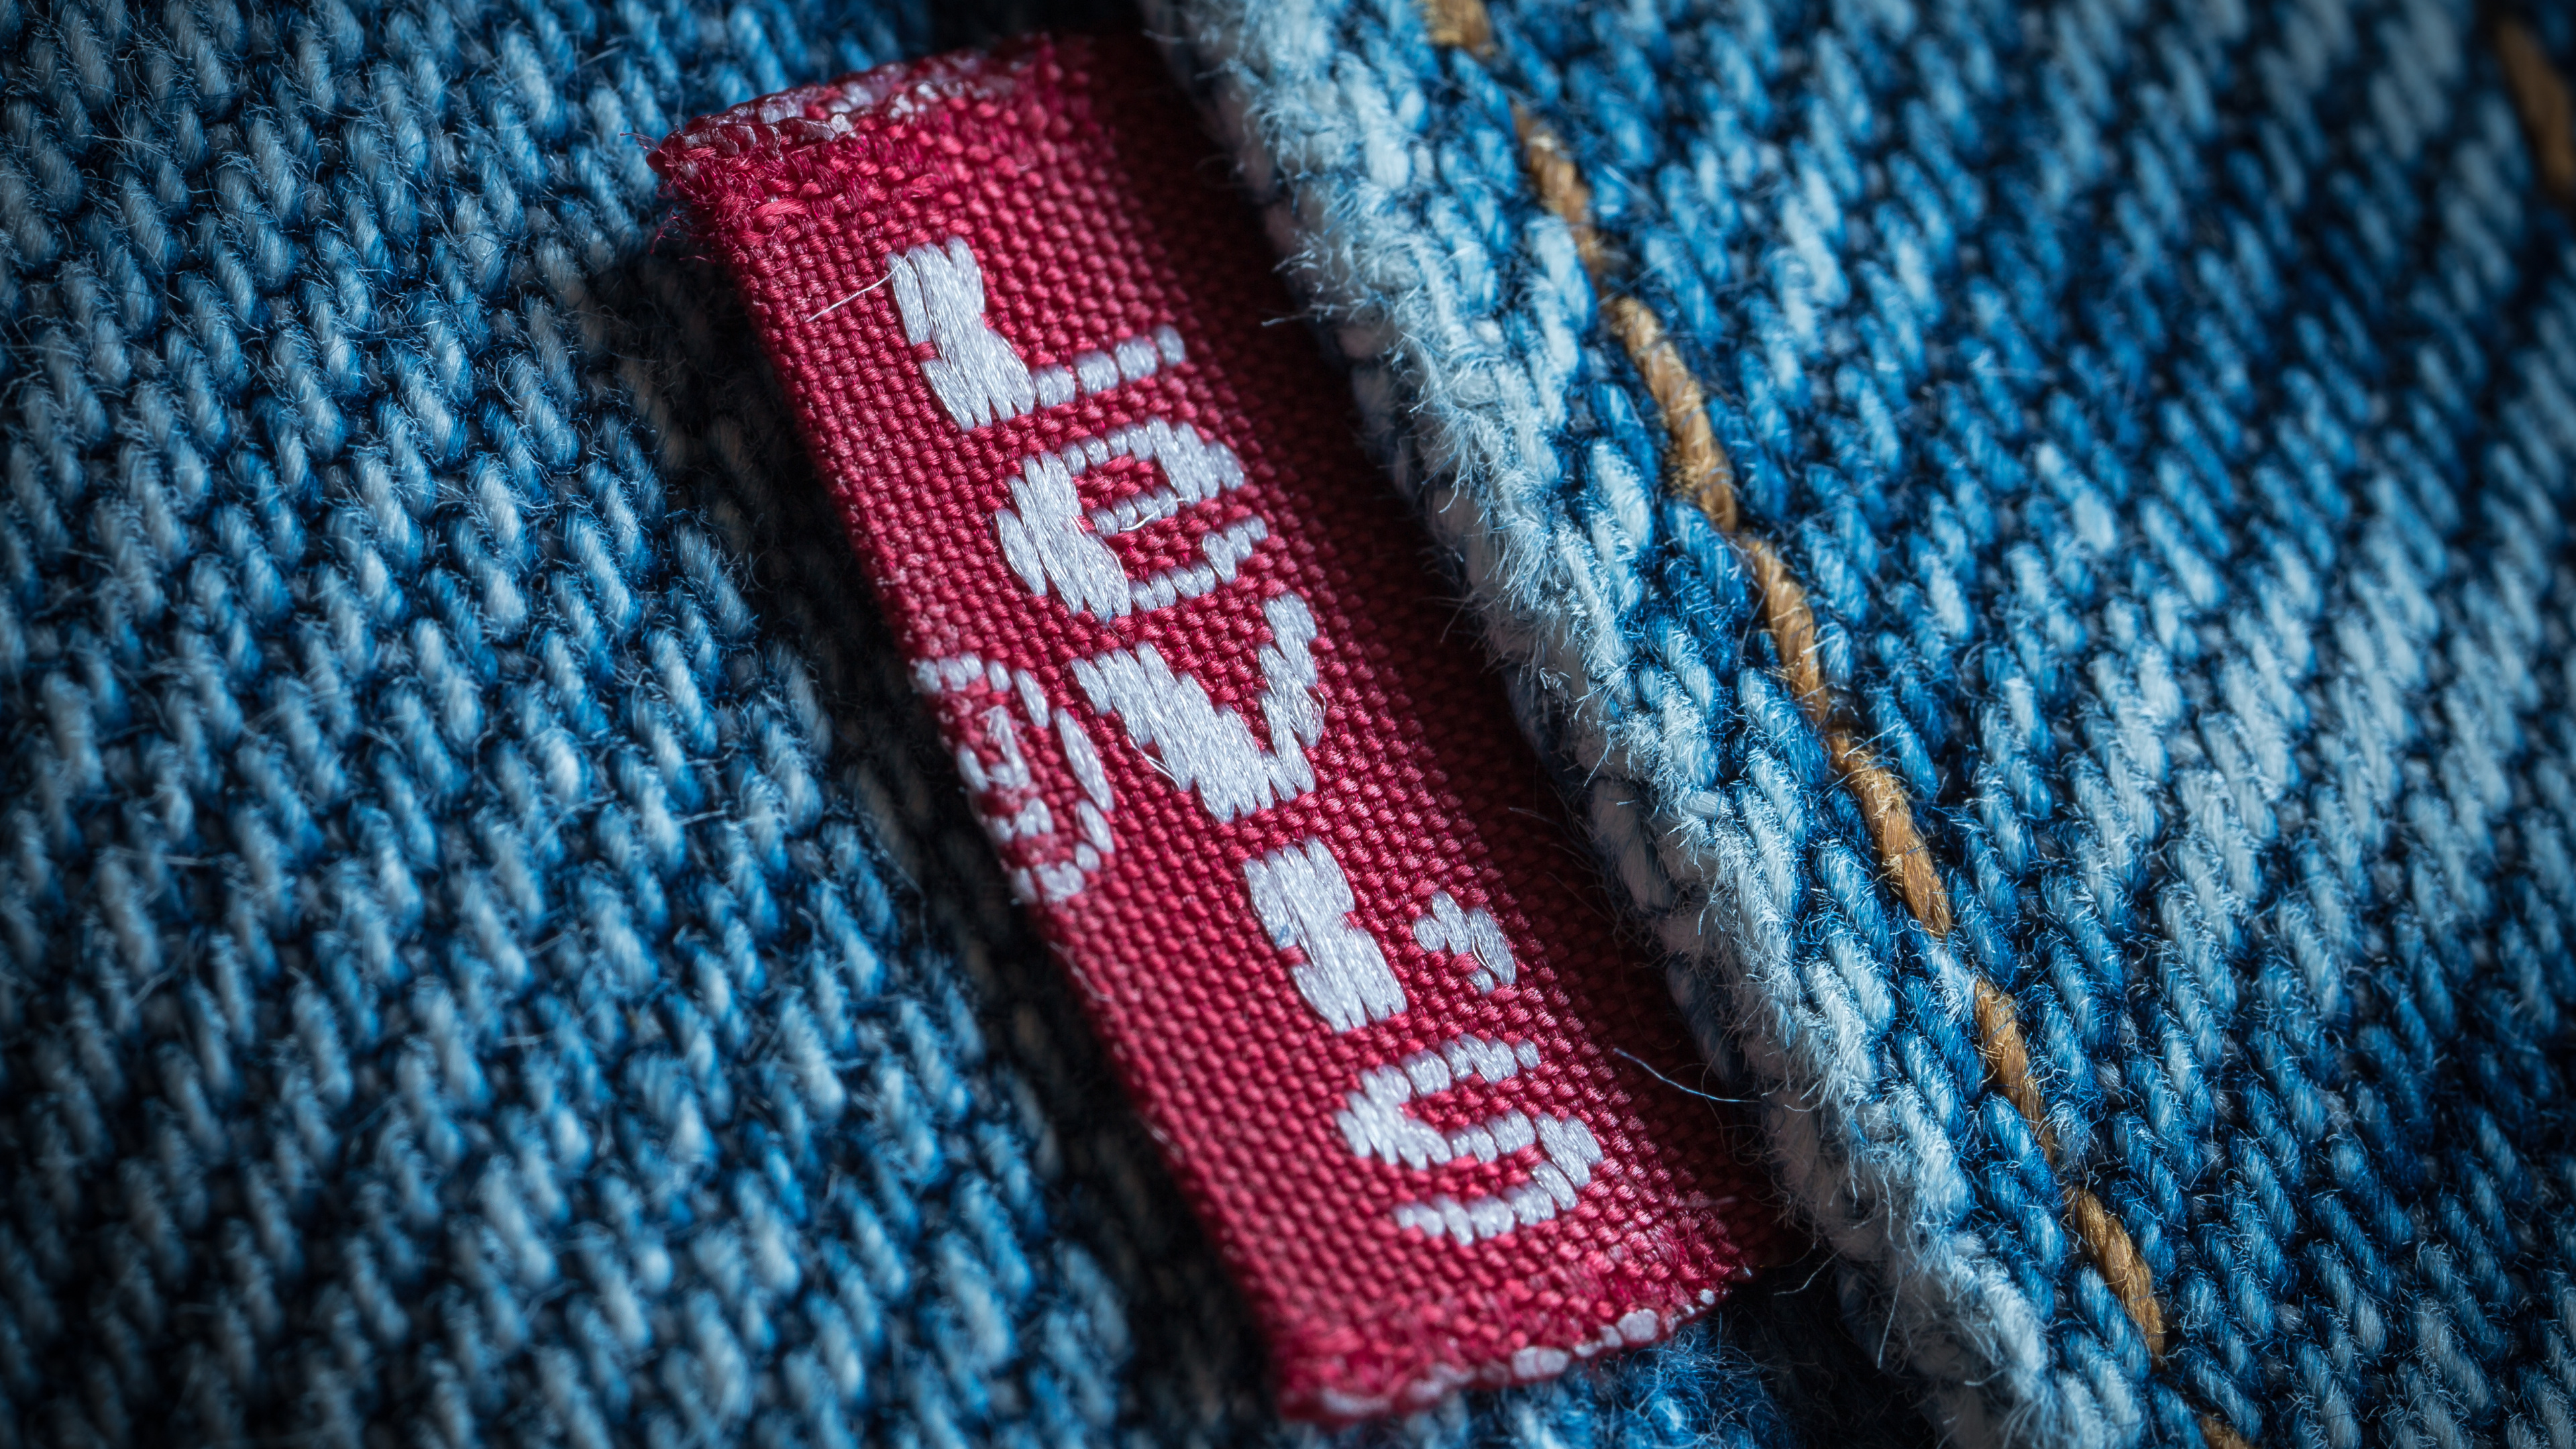 Pants, Knitting, Levis 501, Red, Woven Fabric. Wallpaper in 3840x2160 Resolution